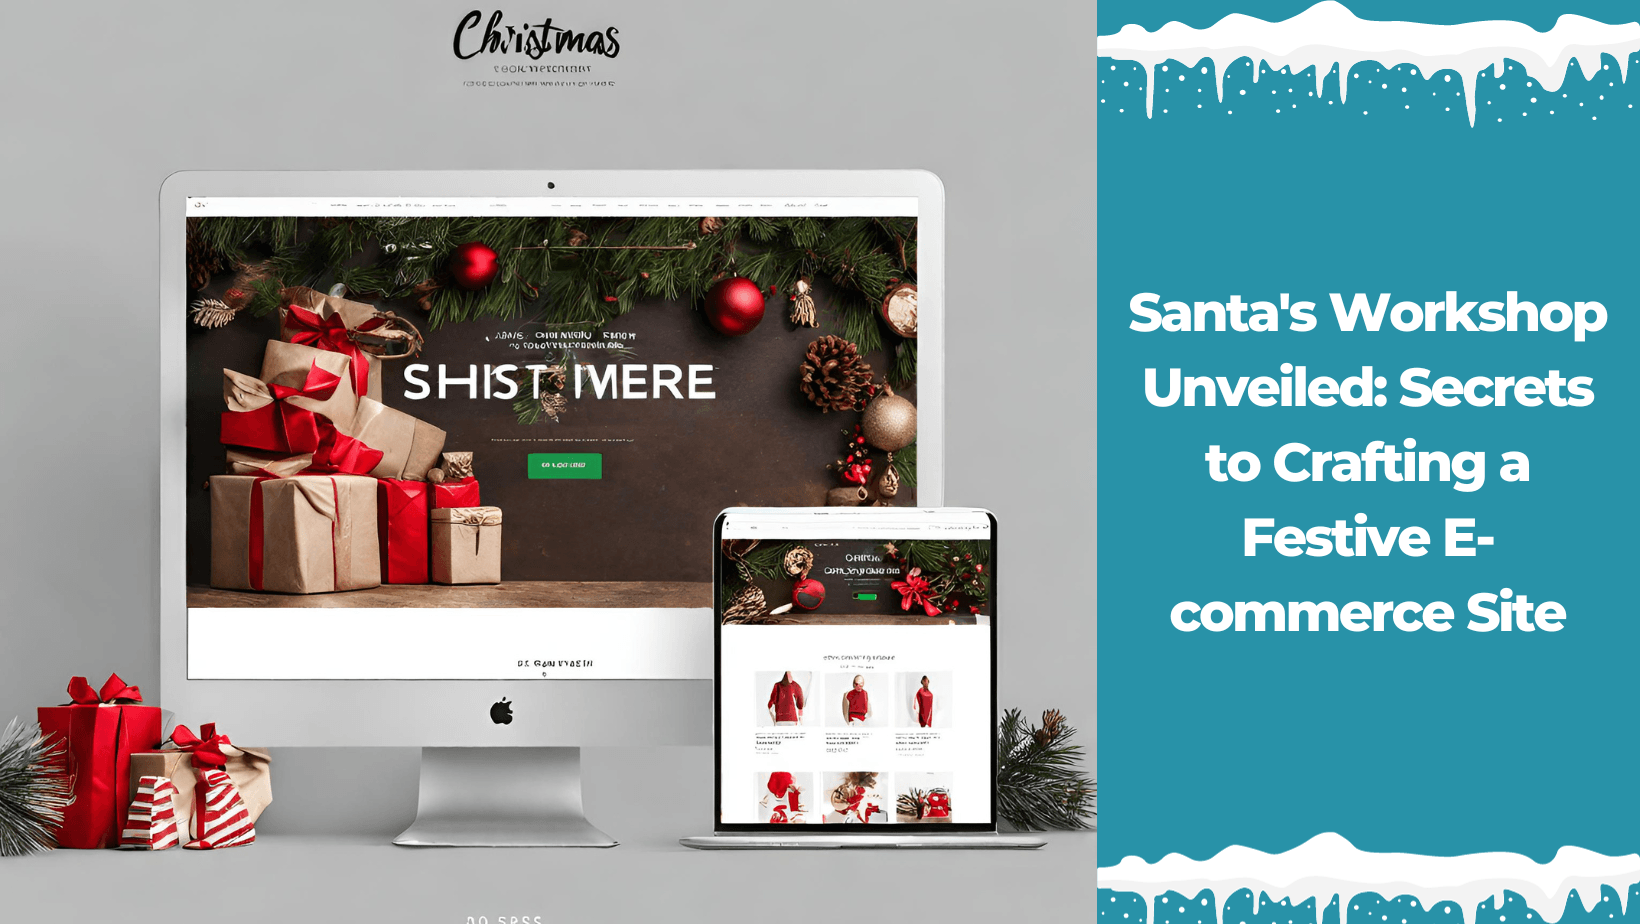 Screenshot of an e-commerce website decorated in festive themes, symbolizing Santa's workshop preparing for the holiday season.